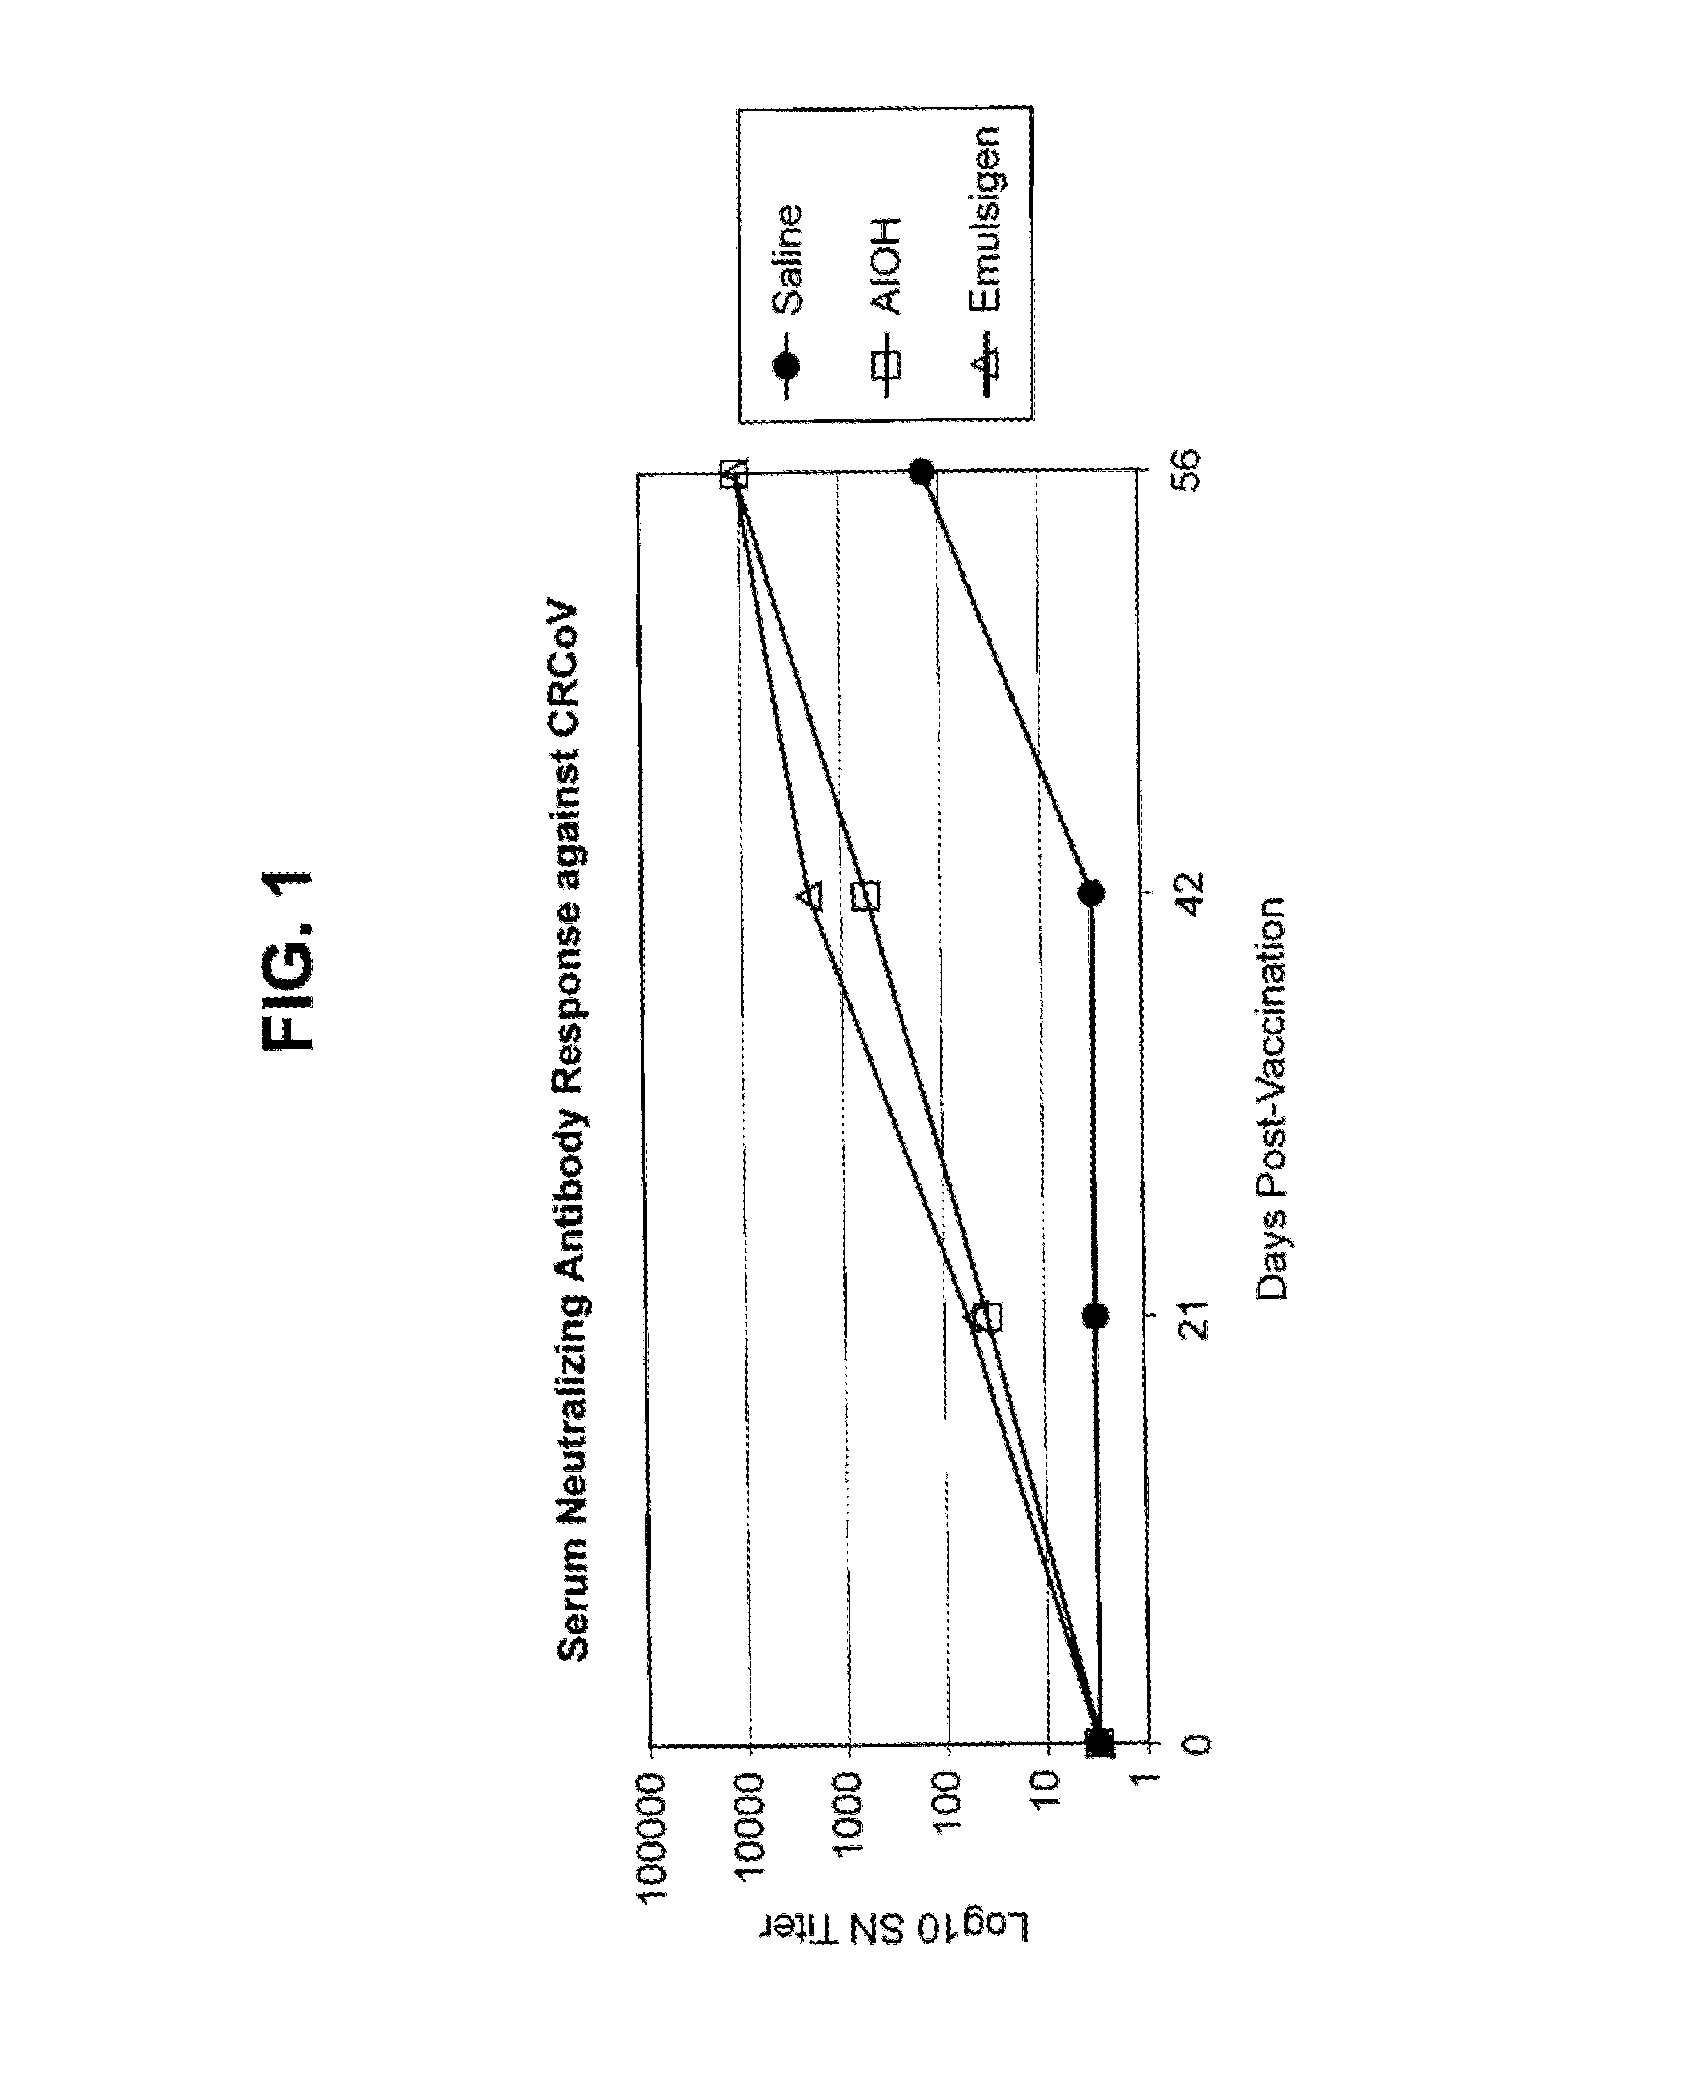 Compositions for canine respiratory disease complex